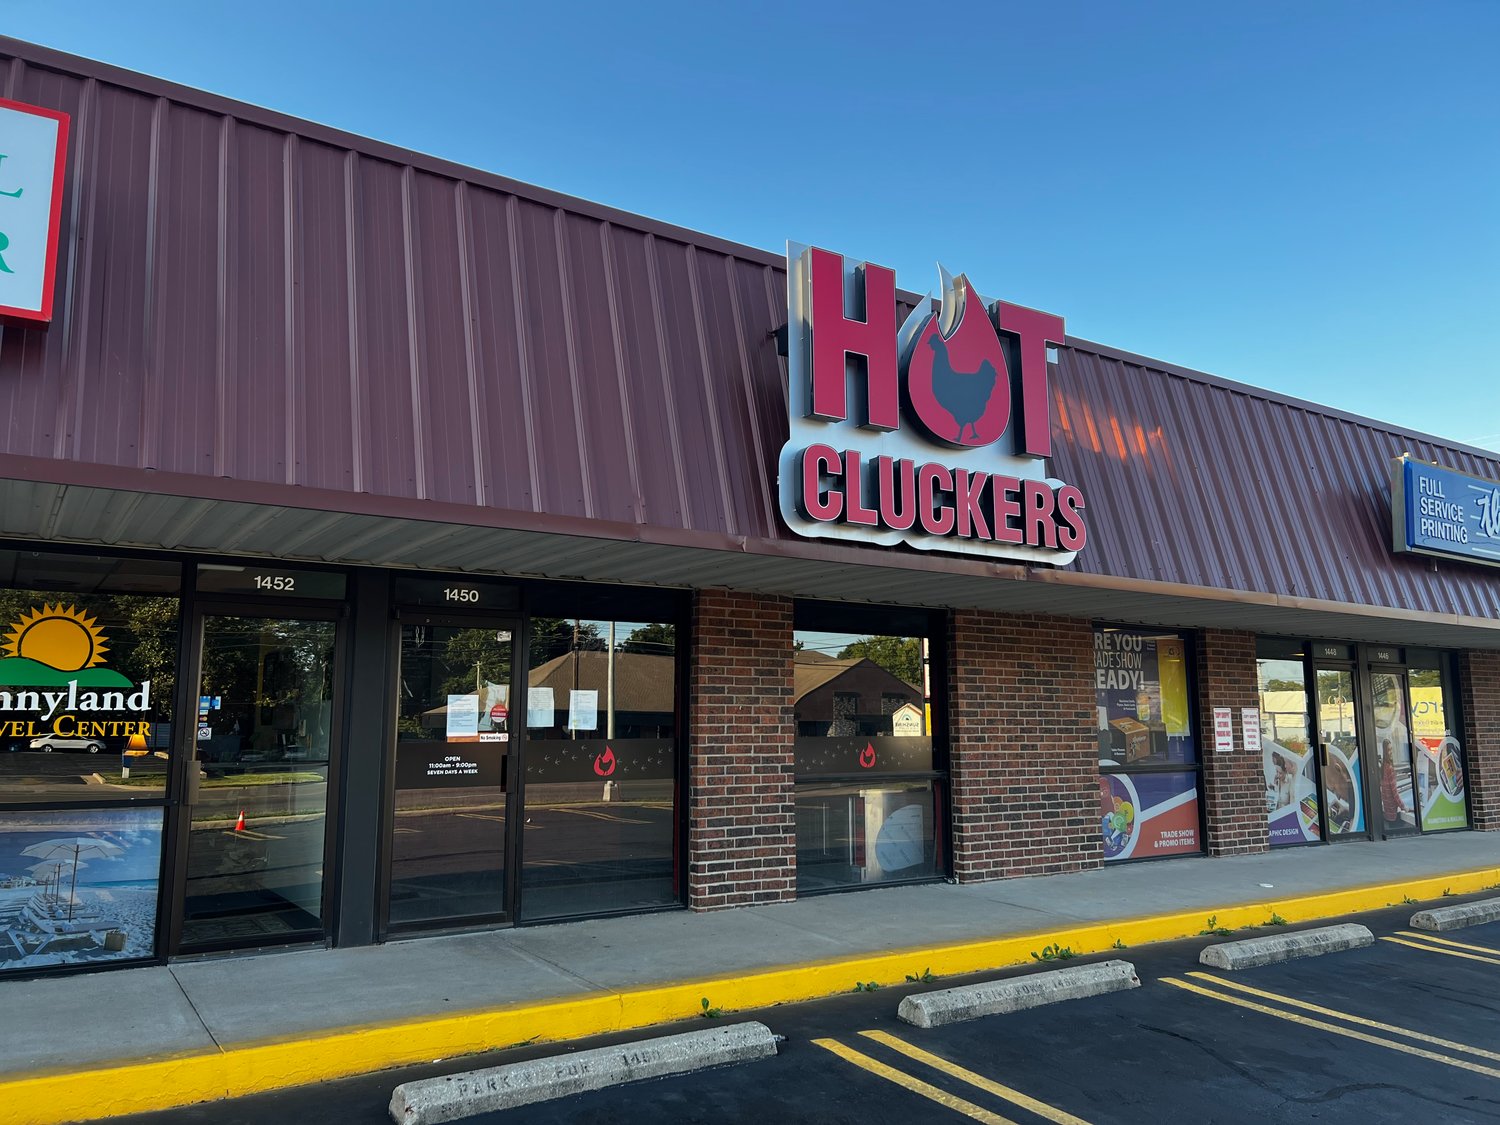 Hot Cluckers formerly operated a restaurant at 1450 E. Sunshine St.